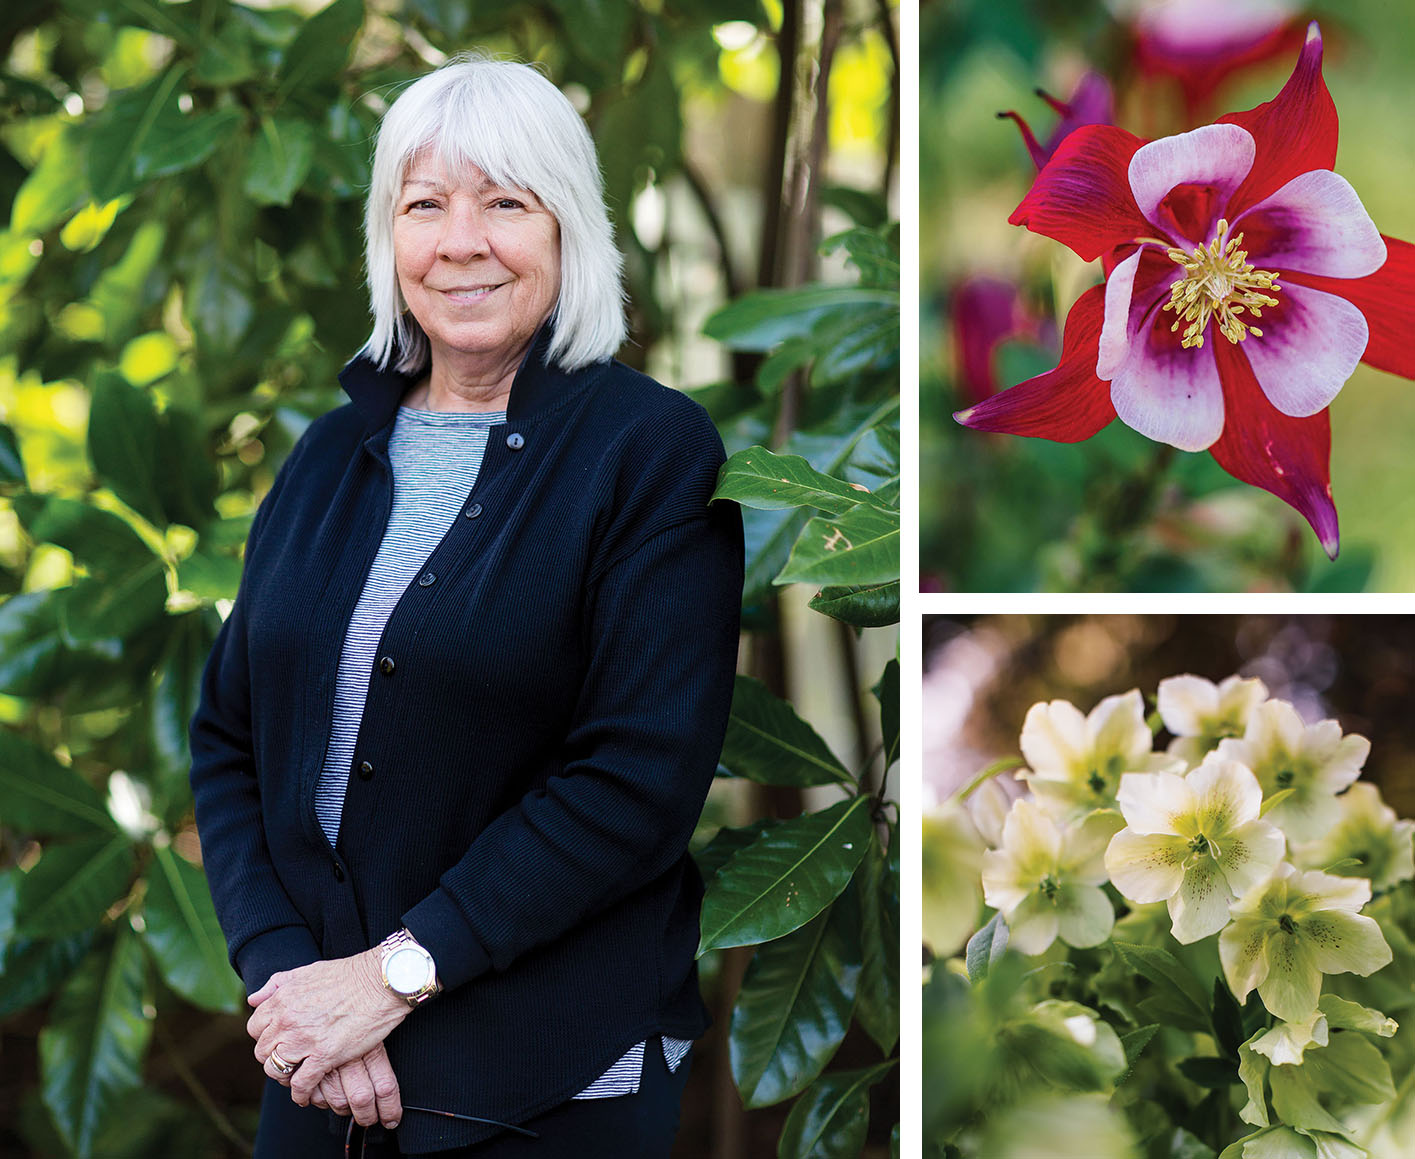 Today’s gardens are “an extension of one’s home,” says Joyce Moore. Photos by Tim Robison.